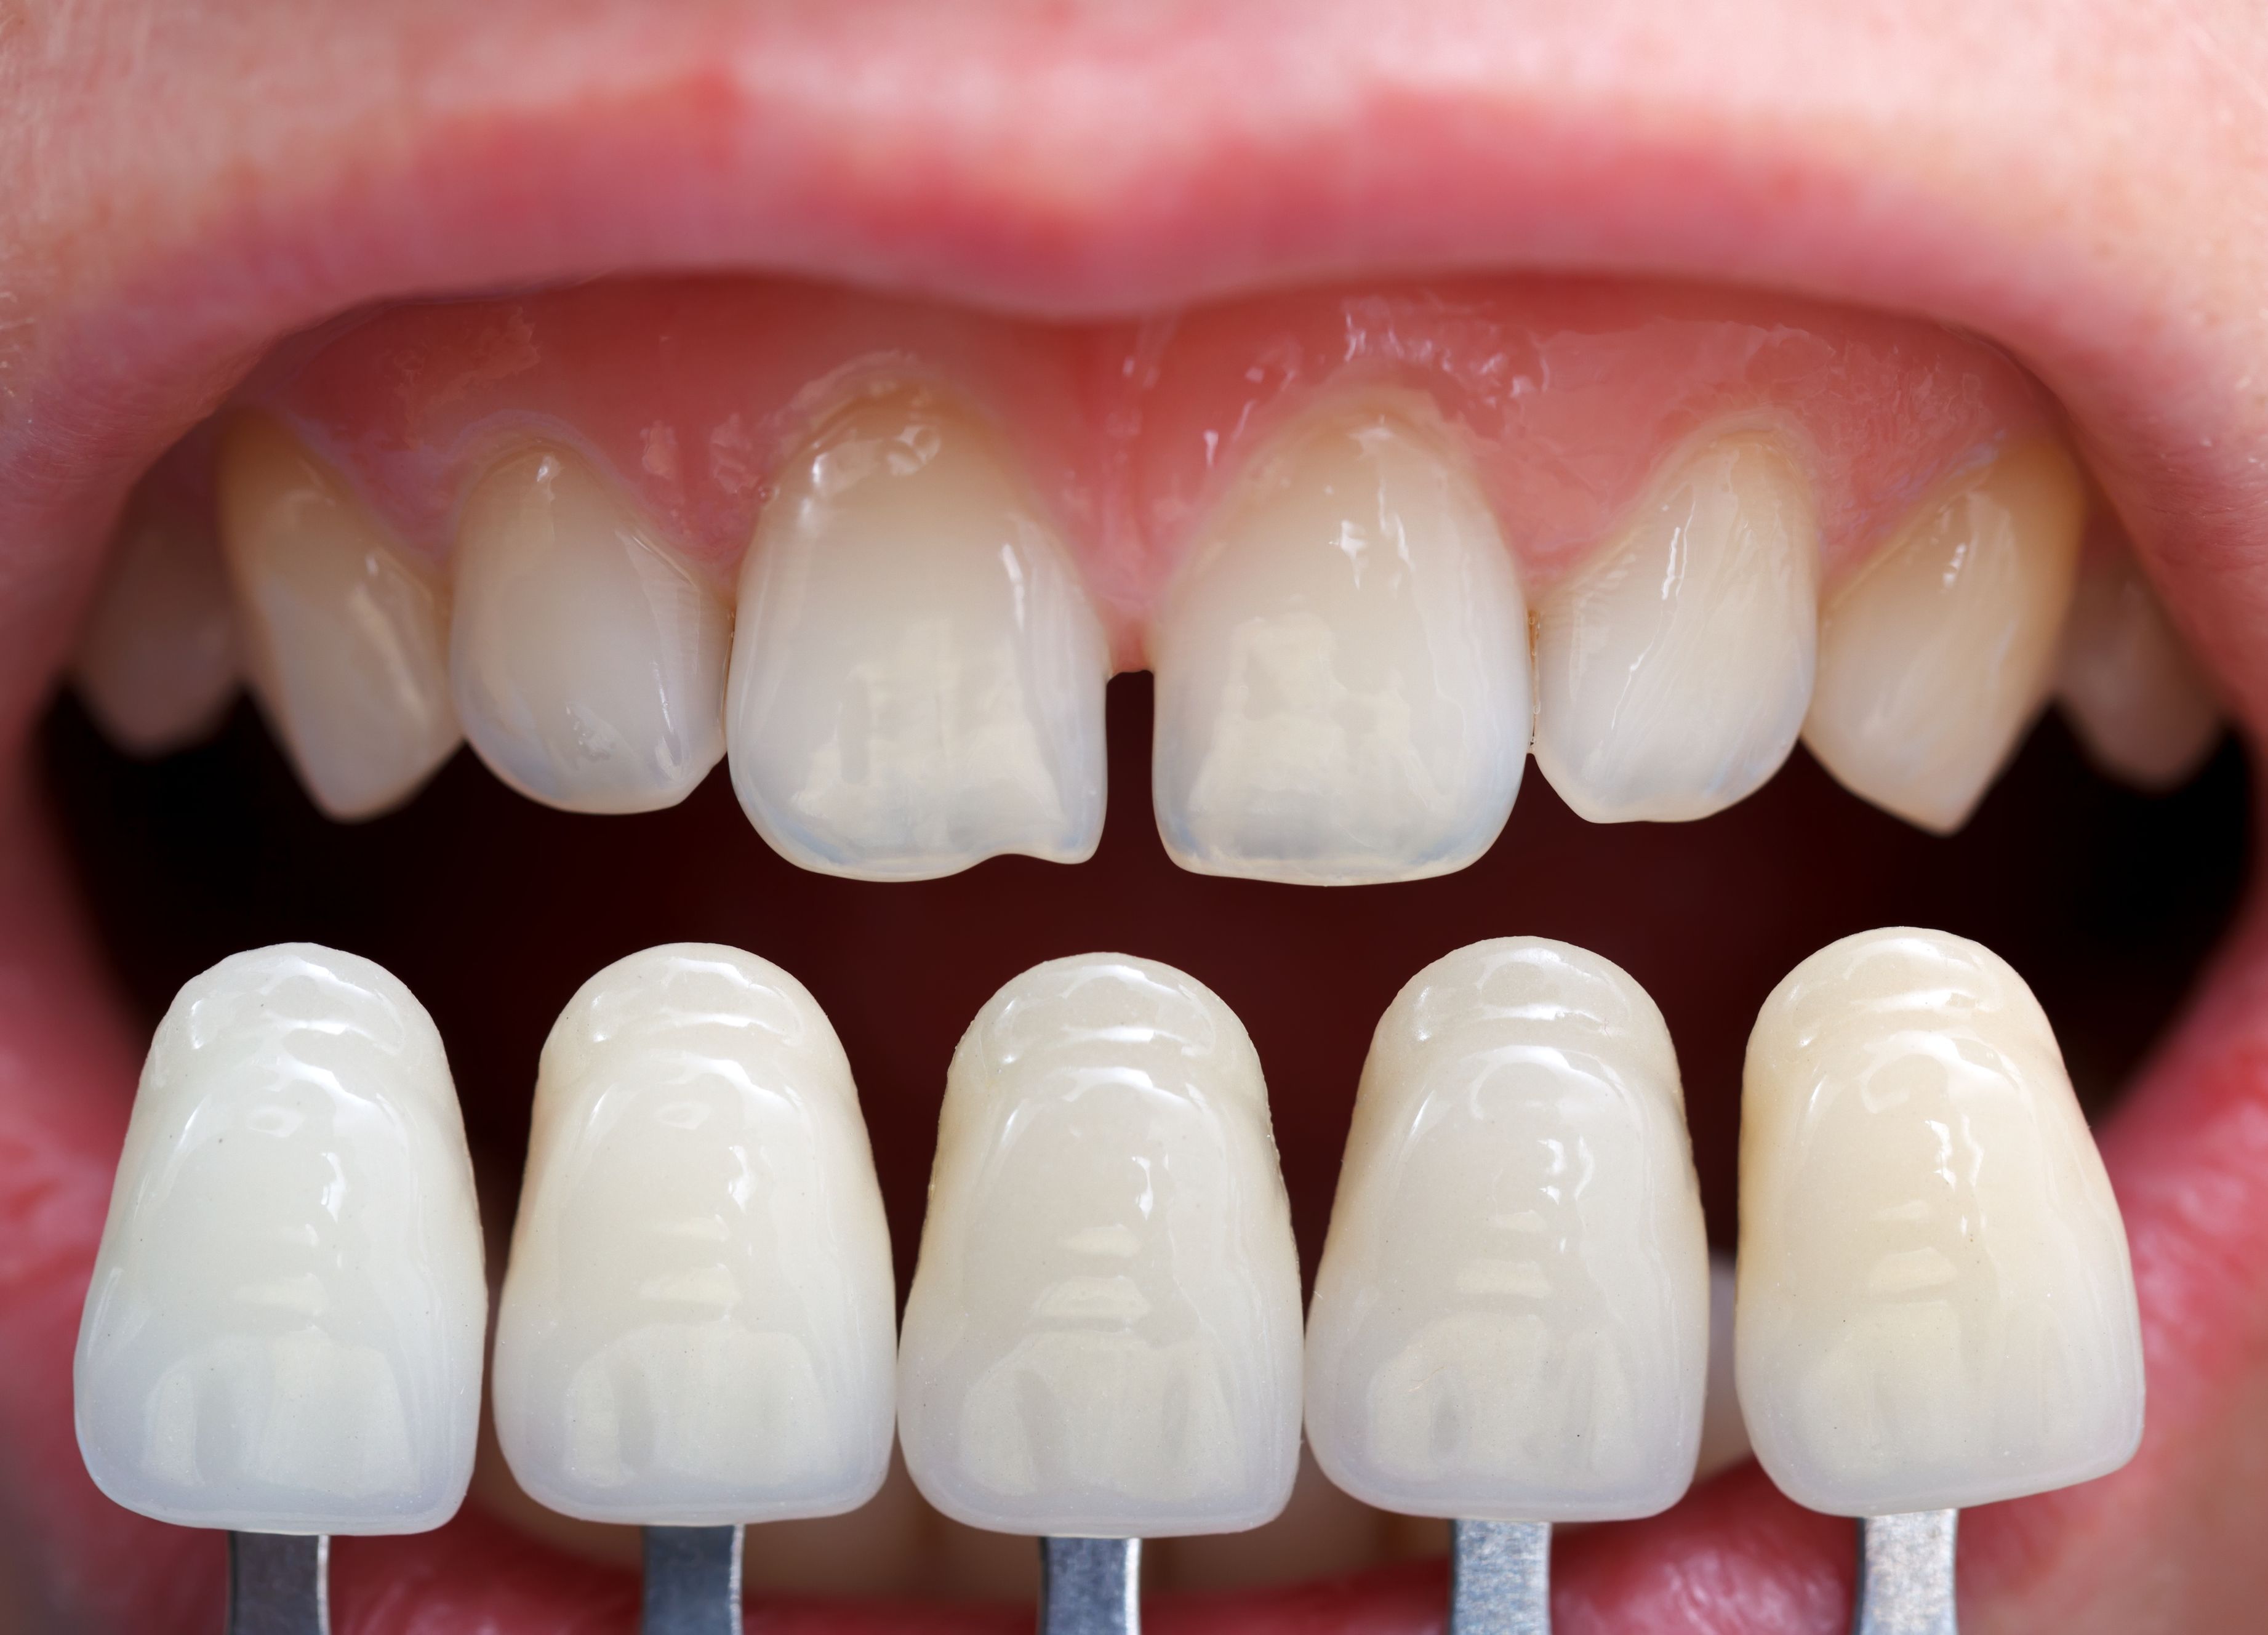 Where can I find a Cosmetic Dentist in Elk Grove?